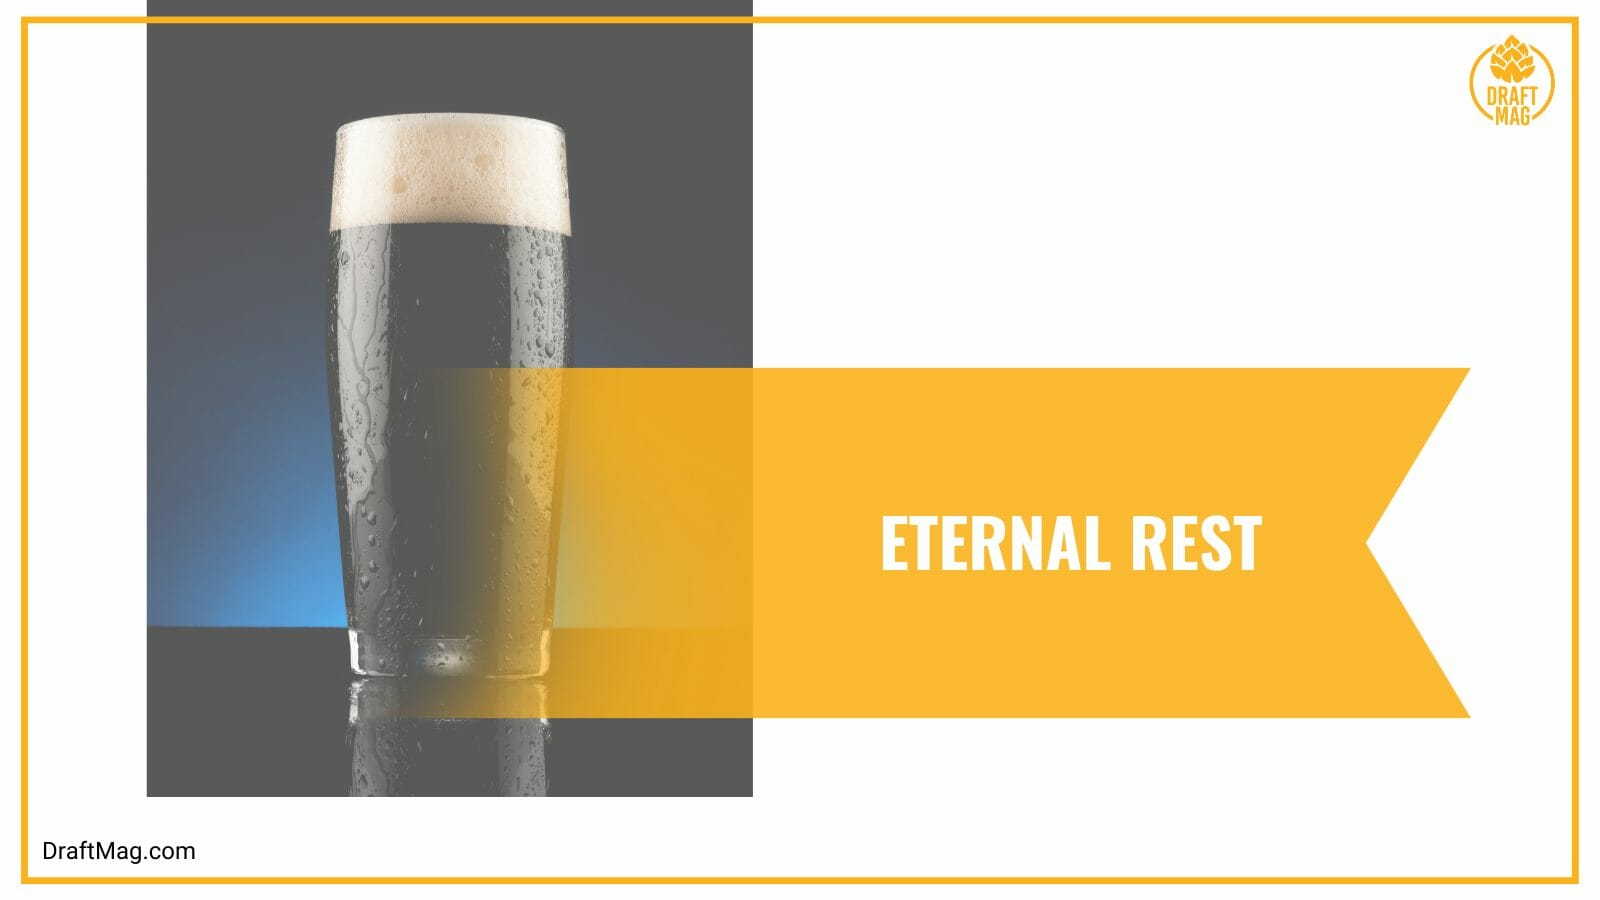 Eternal rest with brown sugar aroma